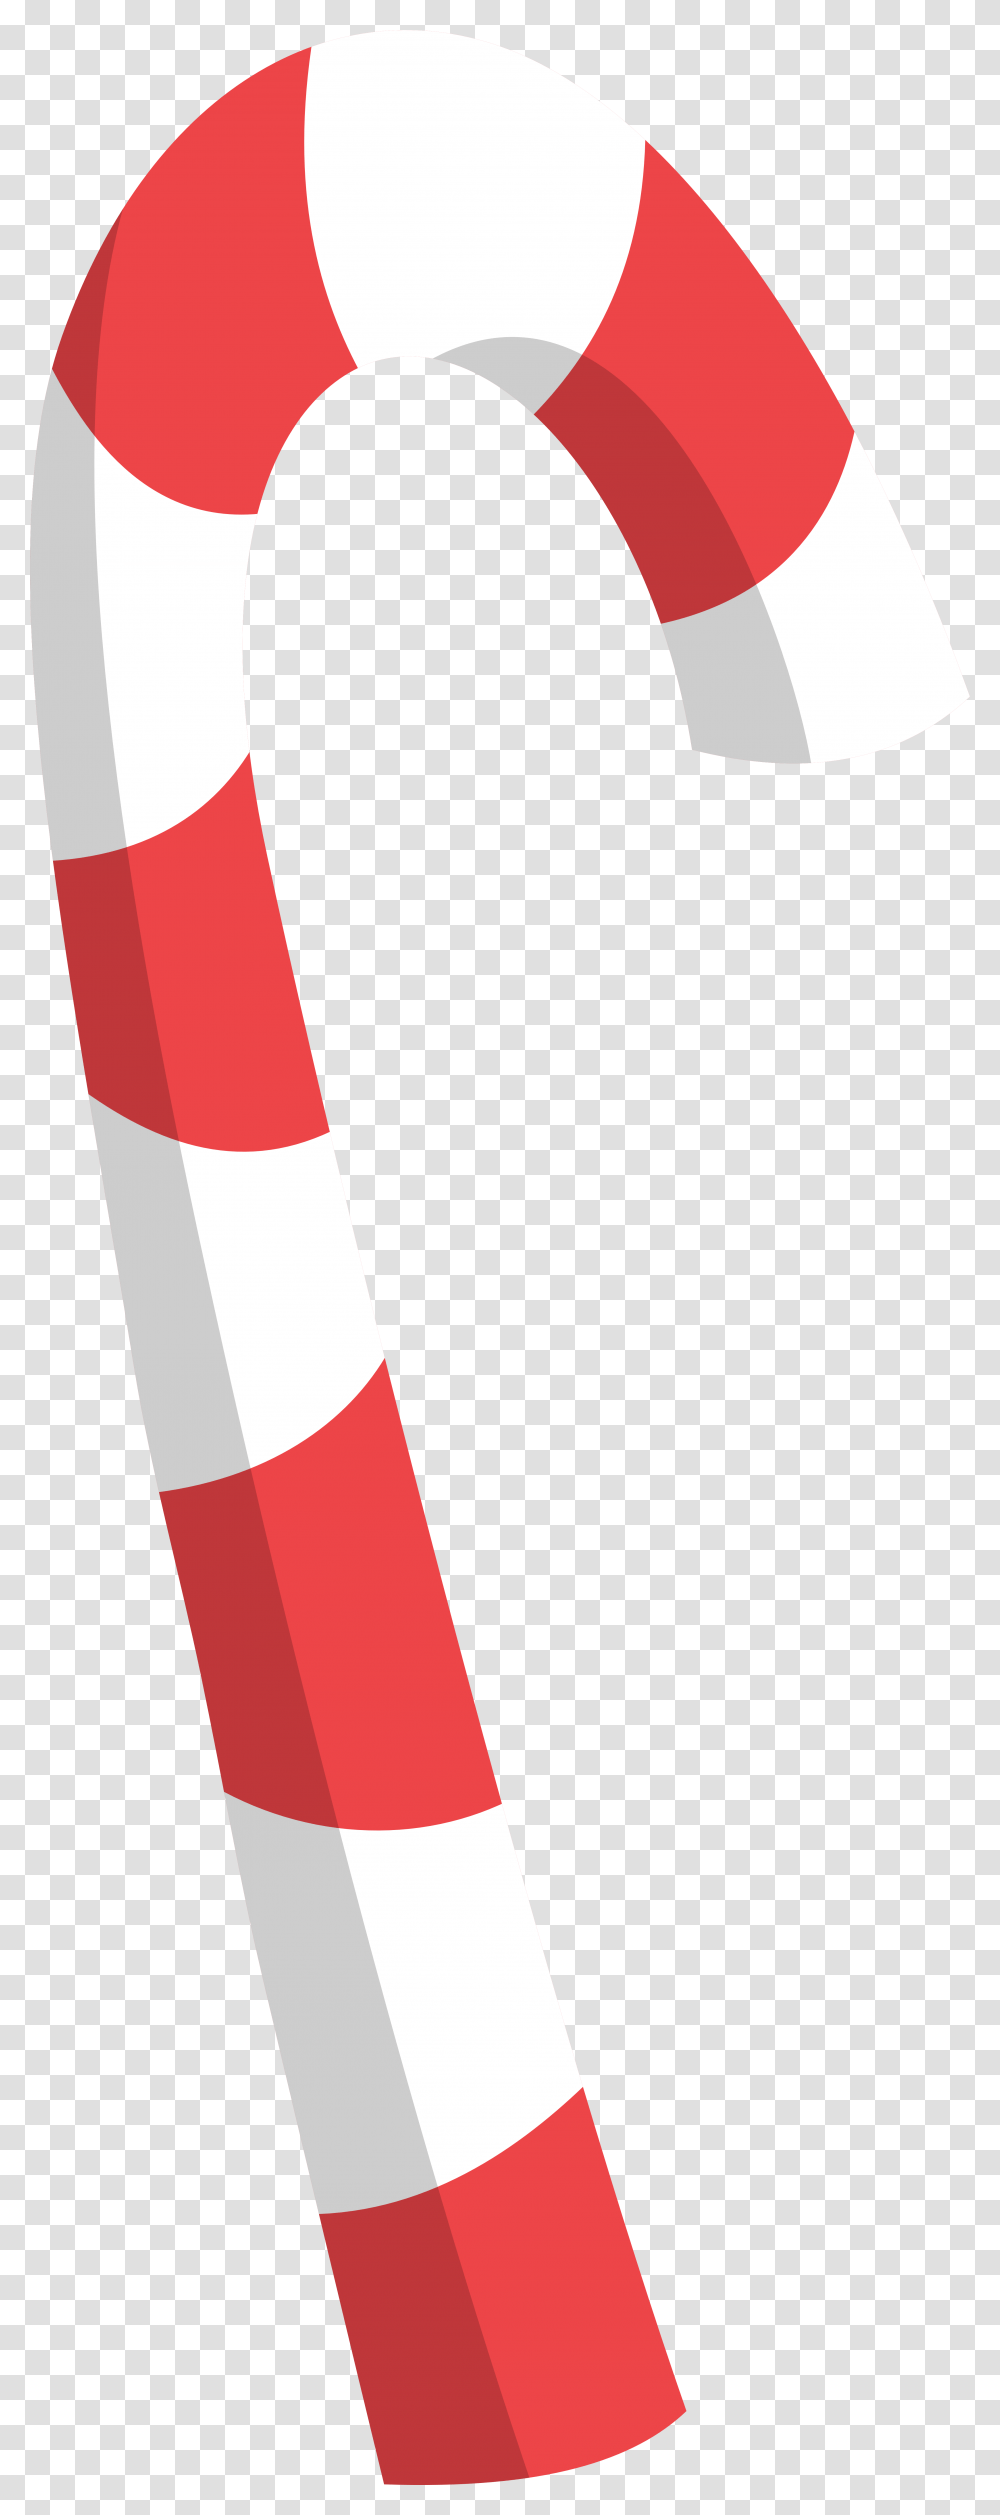 Mouse With Candy Cane Images Image Of Candy Cane, Party Hat Transparent Png